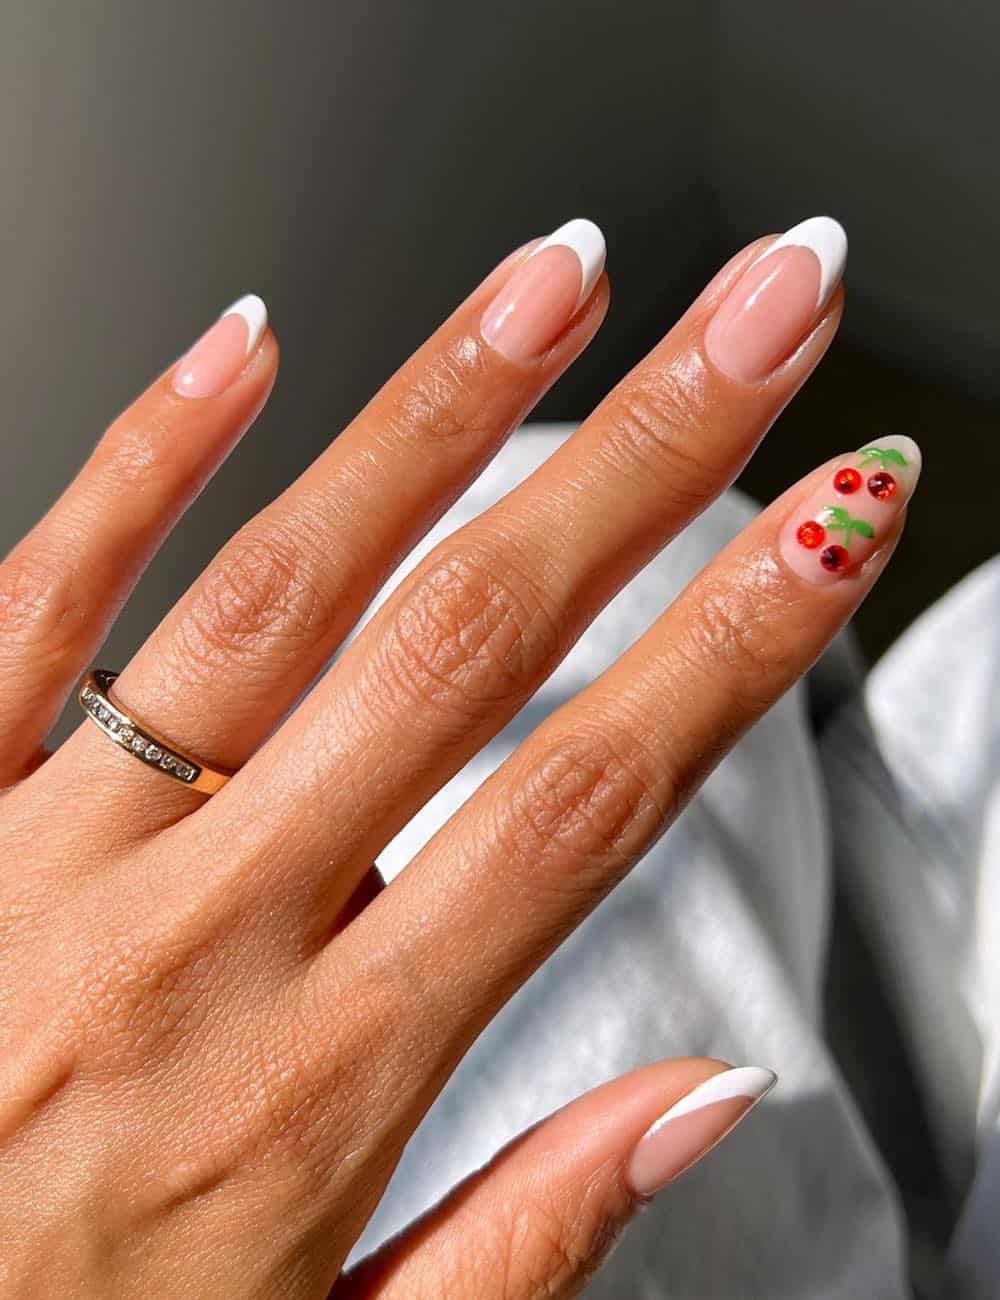 short round nude nails with white tips and an accent nail featuring cherry crystals